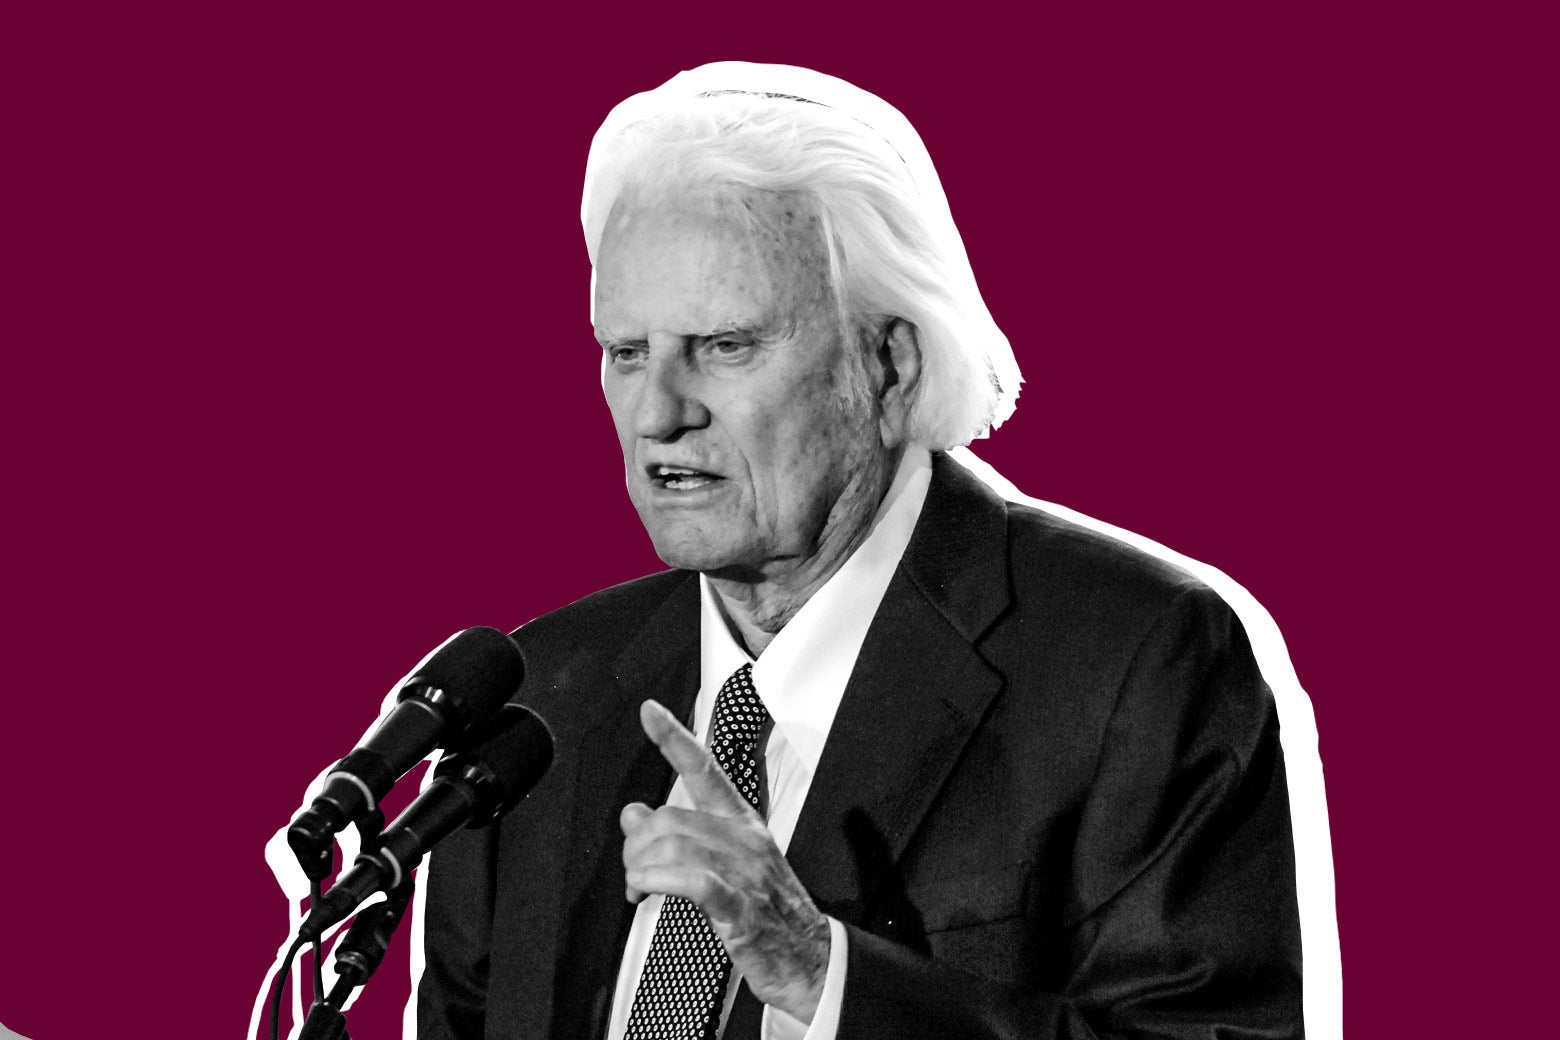 Billy Graham addresses the audience from the stage during the Billy Graham Library dedication service on May 31, 2007, in Charlotte, North Carolina.